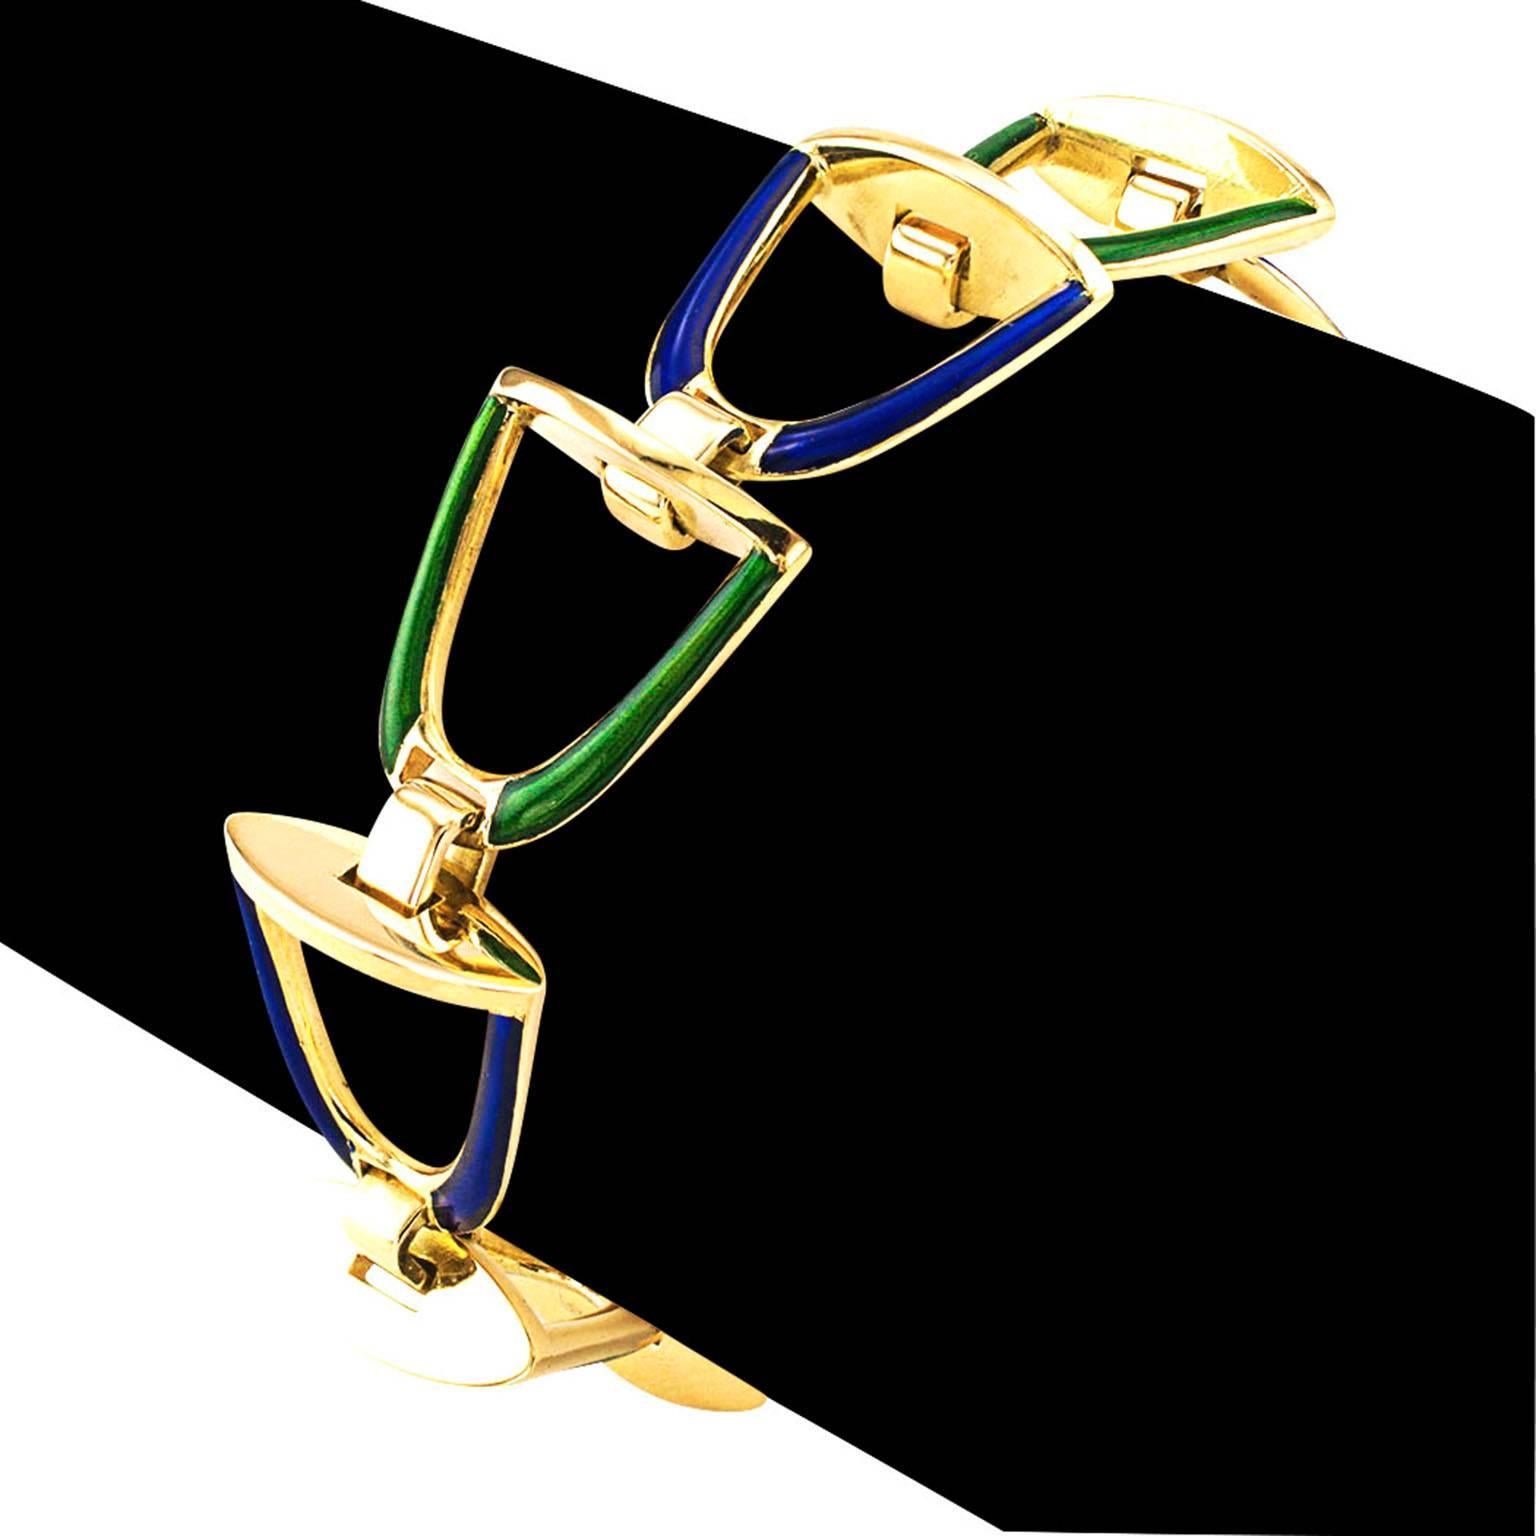 Equestrian Blue and Green Enamel Stirrup Bracelet

Equestrian done differently, simple in design, with a color palate that is attractive, neutral to other colors and irresistible to the eye.  A series of linked stirrups decorated with alternating